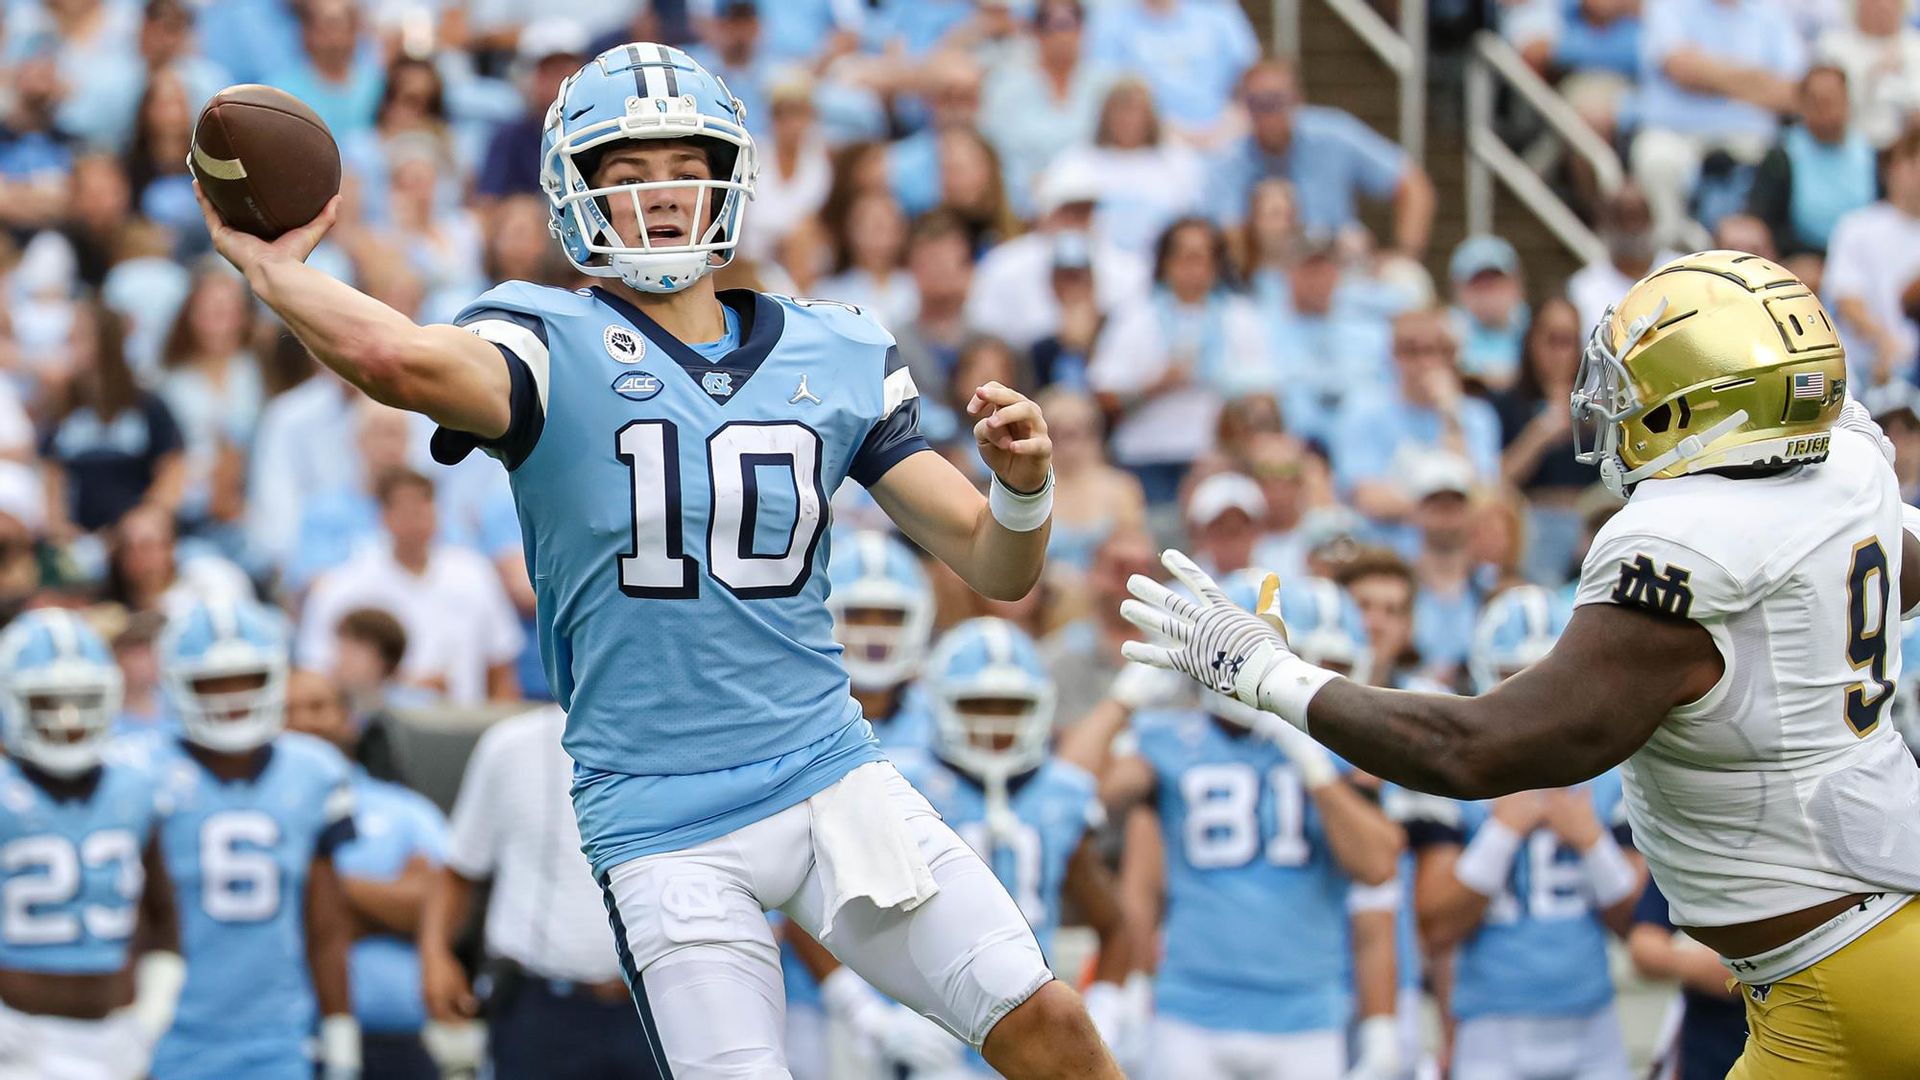 UNC Football vs. Virginia Tech: How to Watch, Cord-Cutting Options, Kickoff Time